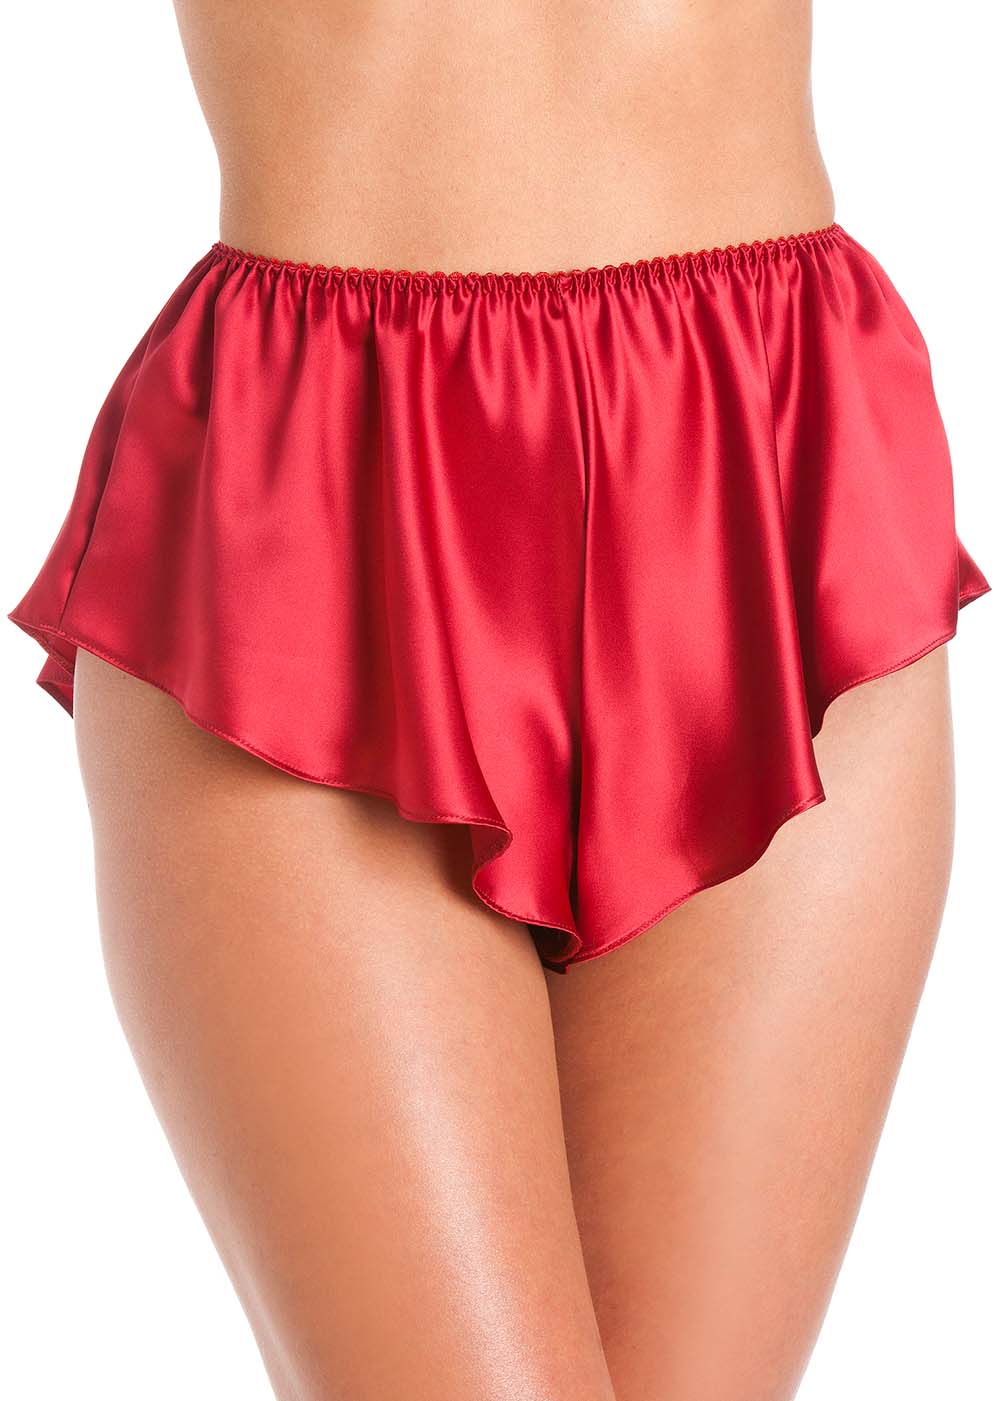 Cranberry silk French knickers